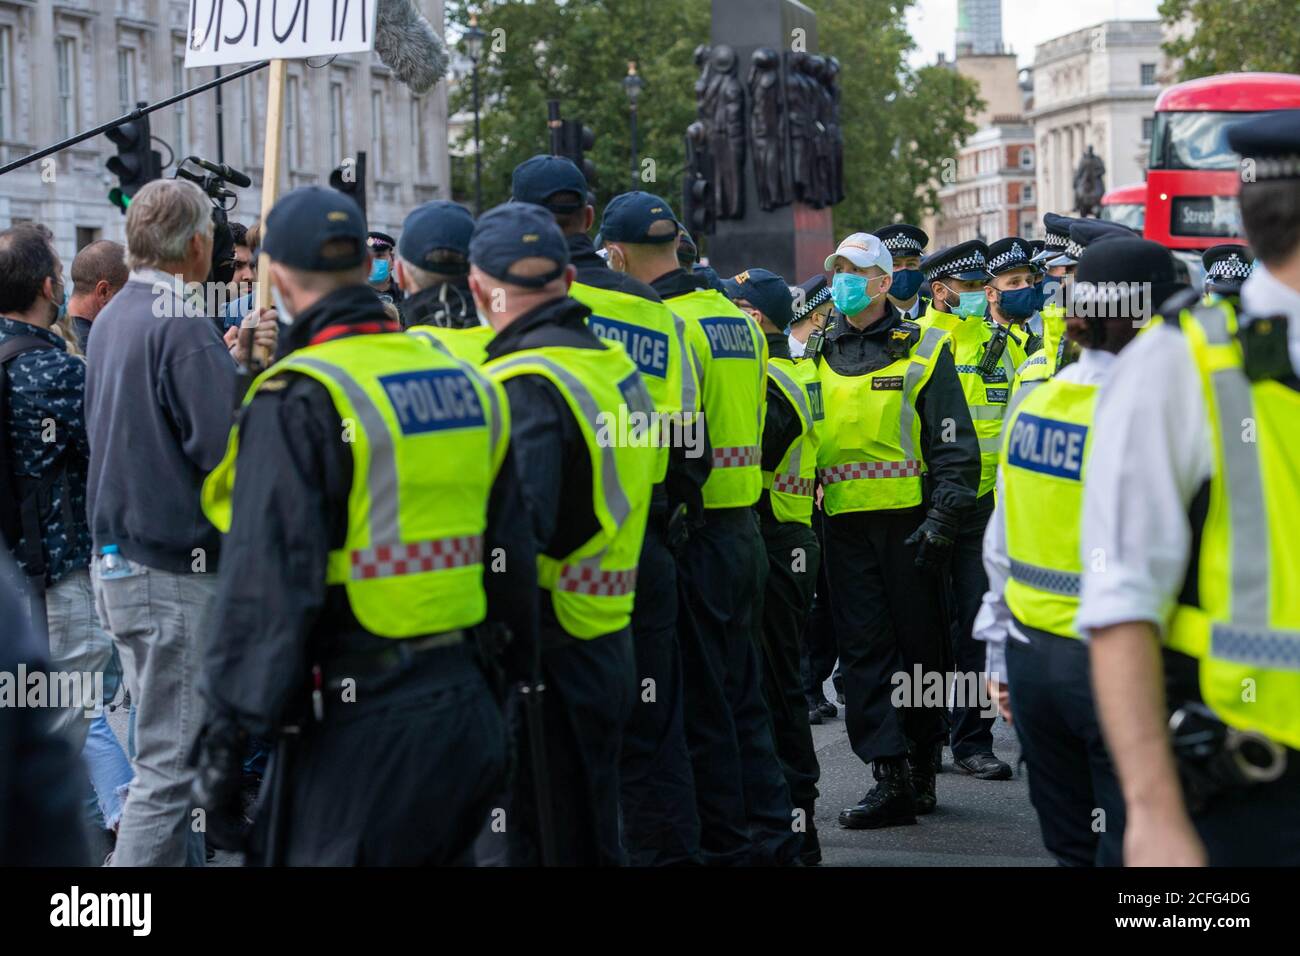 London 5th September 2020 A relatively peaceful 'Anti-Vaxx' rally outside Downing Street suddenly turned violent when police started to make arrests as the rally broke up. City of London public order police formed a cordon forcing everyone up Westminster towards the Houses of Parliament. Credit: Ian Davidson/Alamy Live News Stock Photo